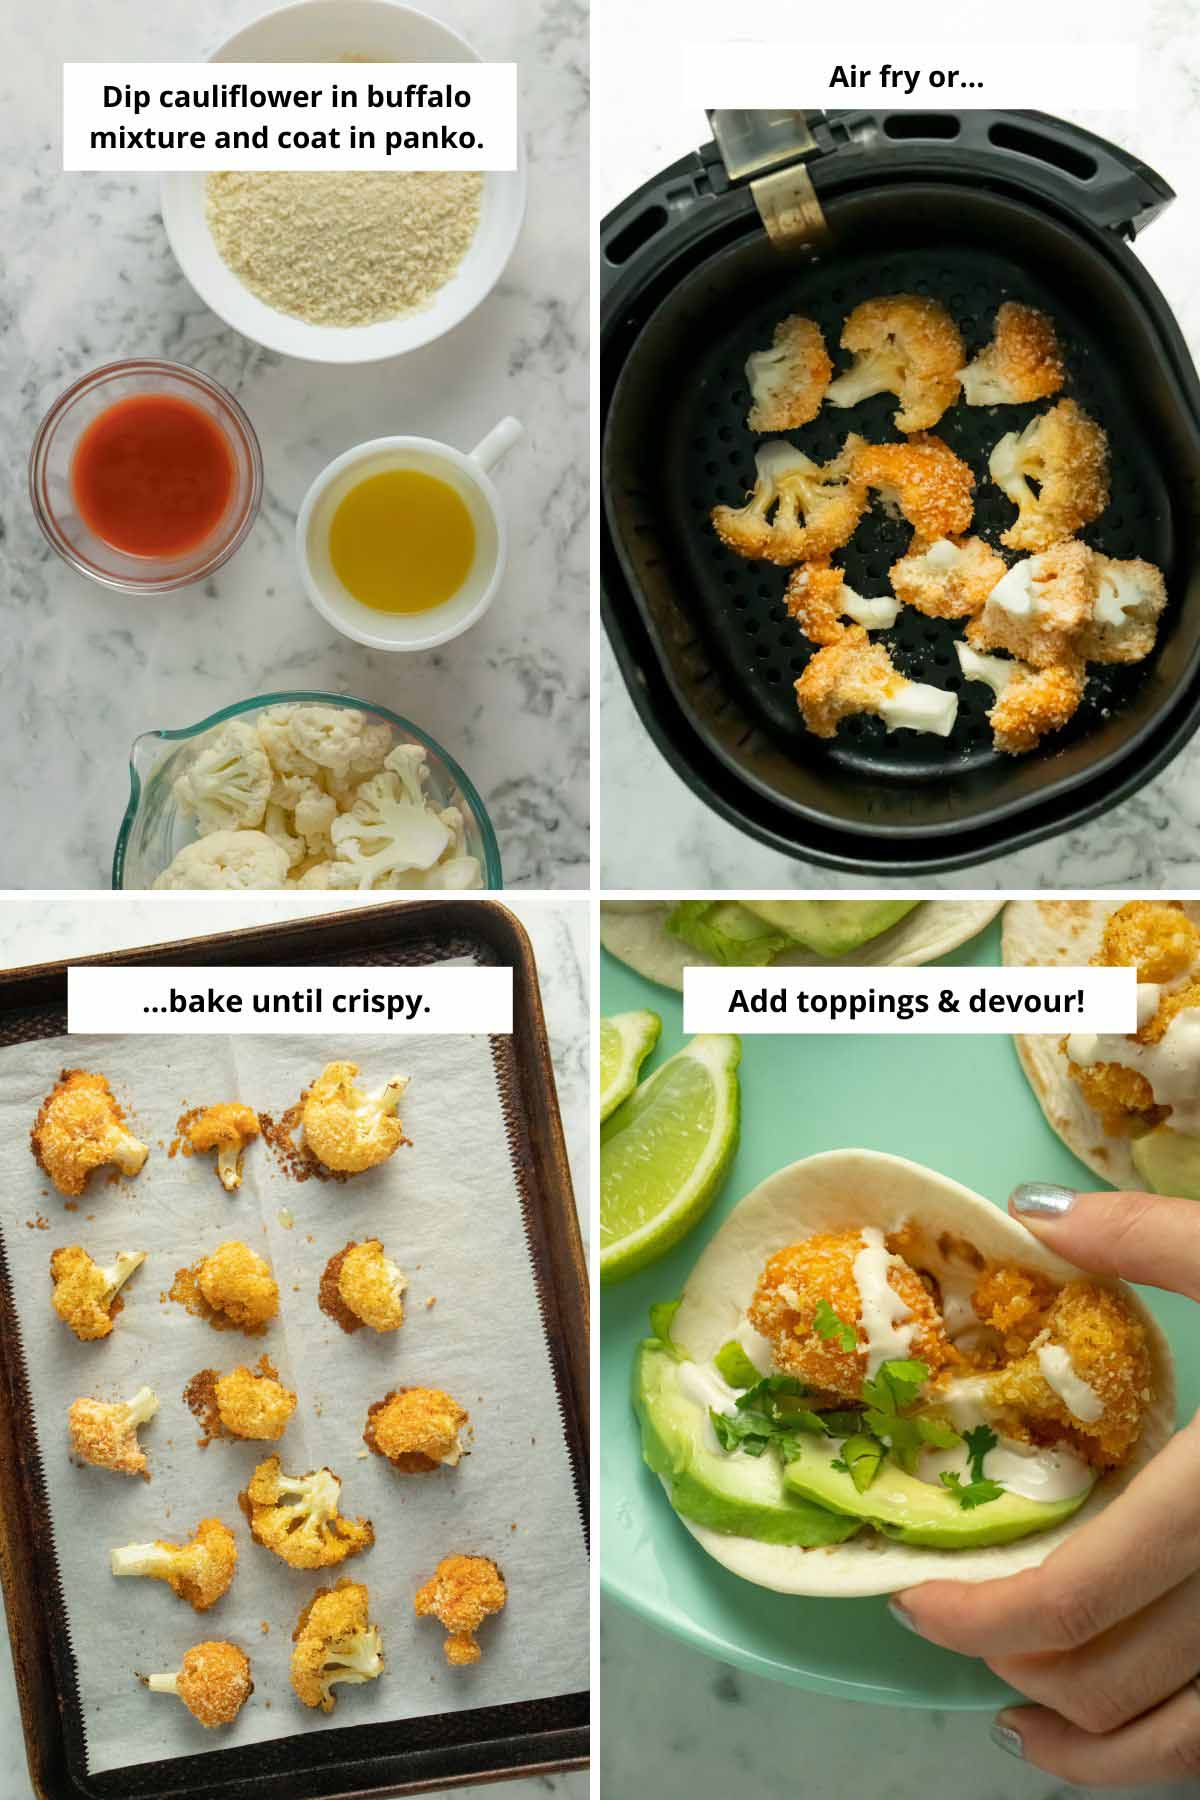 image collage showing the buffalo cauliflower elements, the cauliflower in the air fryer basket before cooking and on a baking sheet after cooking and a hand picking up one of the tacos